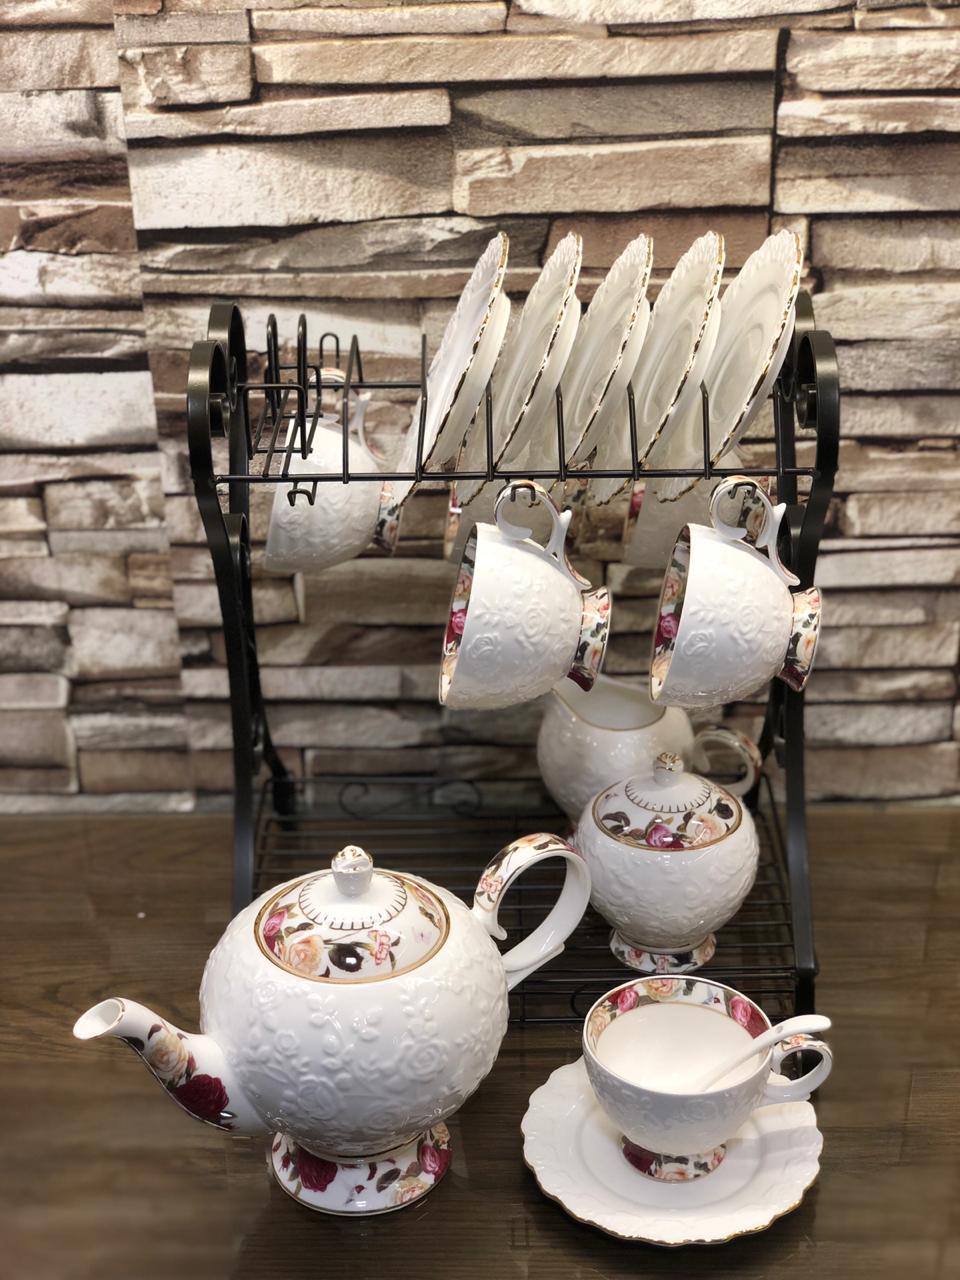 High Quality 21 Tea Set With Stand